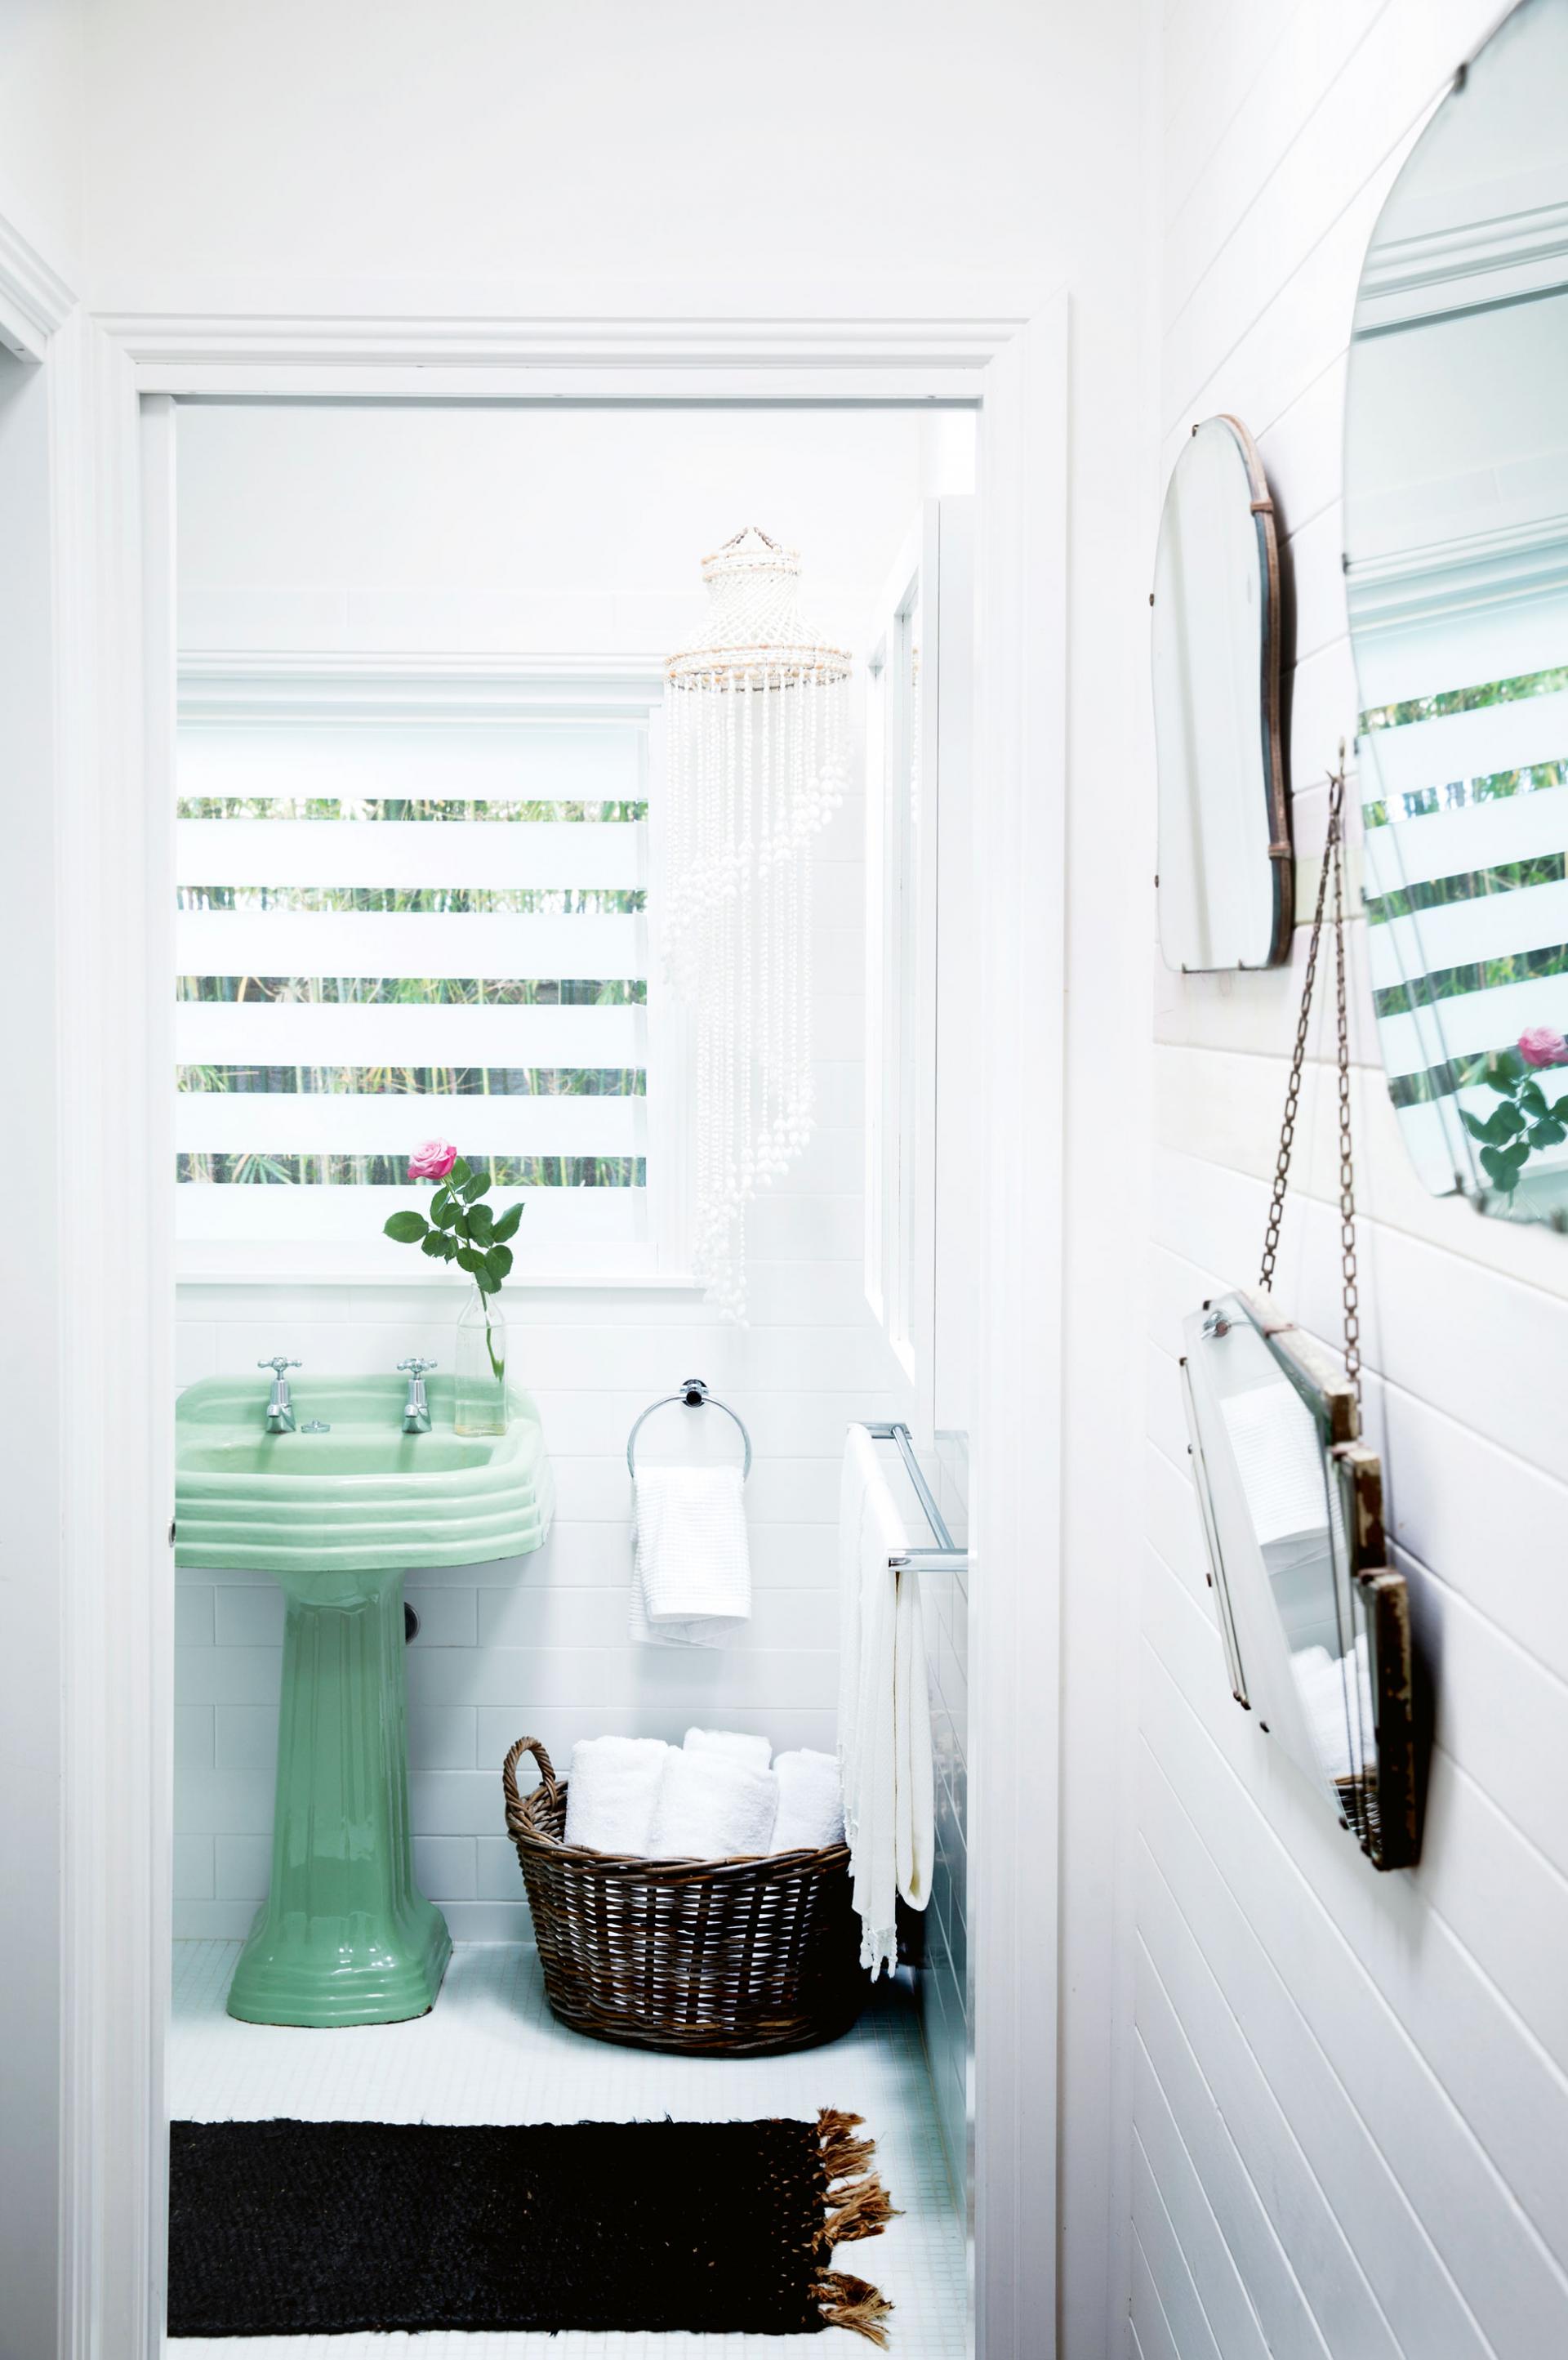 7 Modern Bathrooms With Colorful Vintage Fixtures